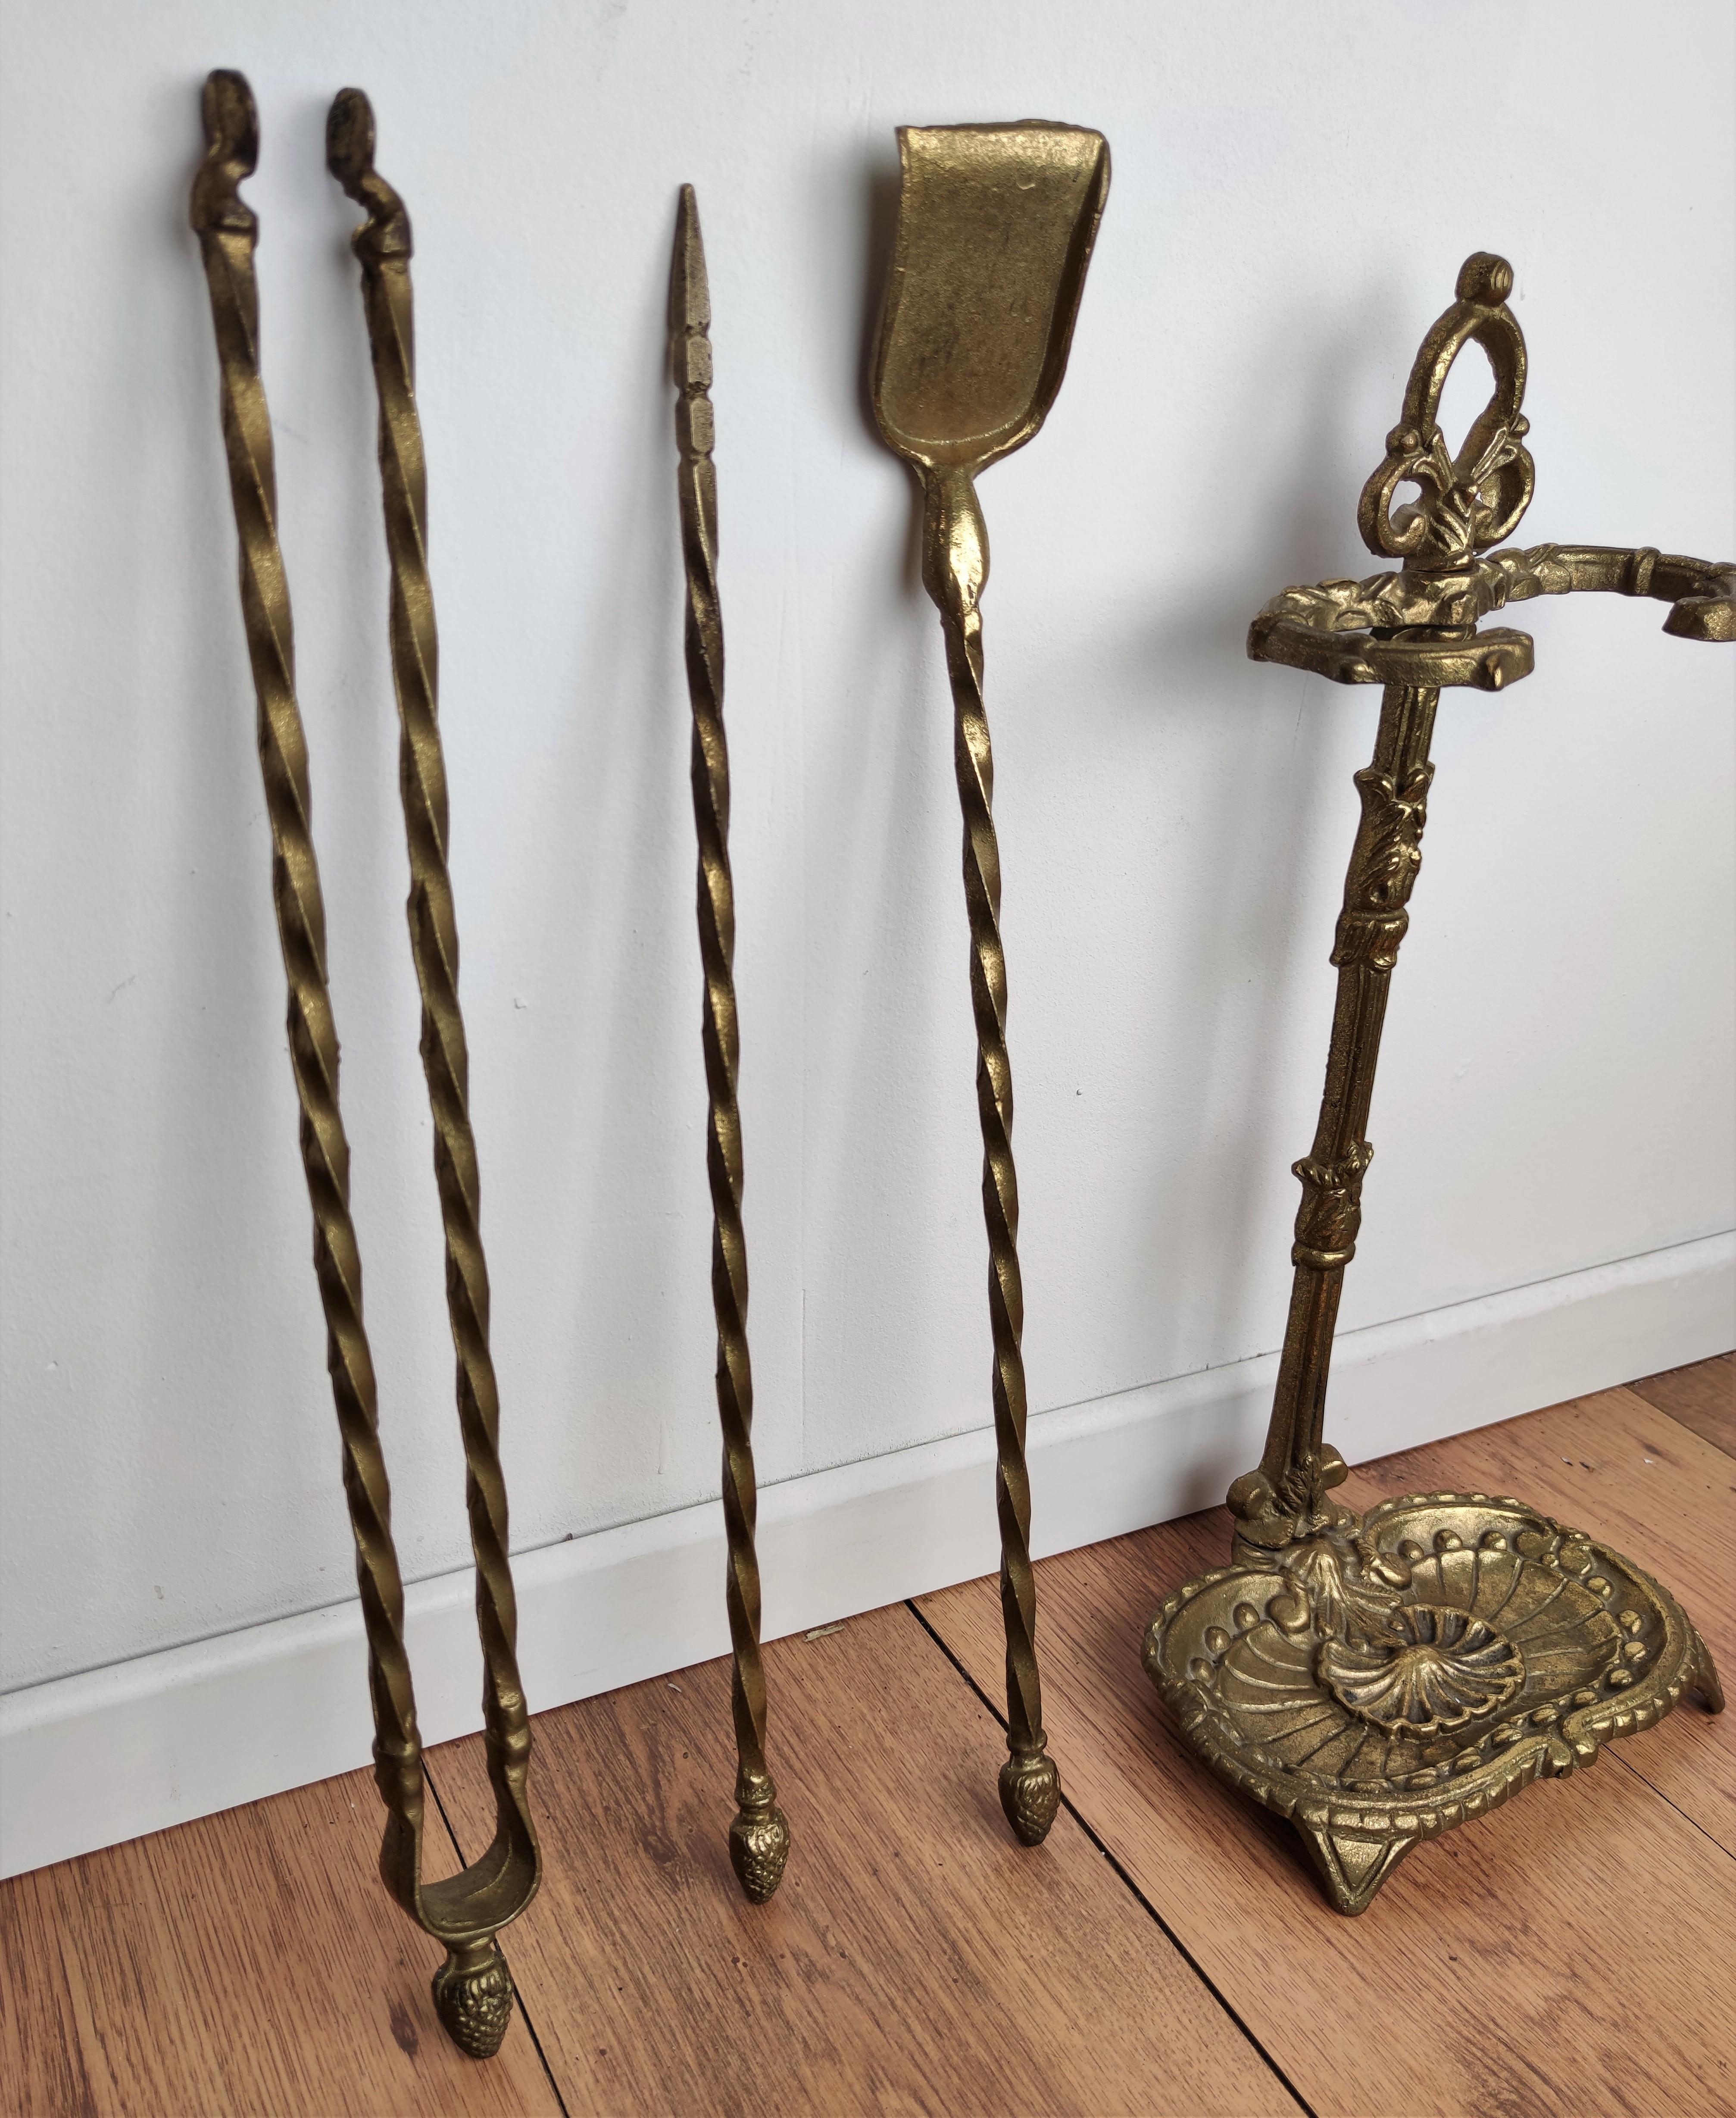 1960s Italian Three-Piece Brass Acorn Ornated Vintage Fire Tool Set with Stand 1